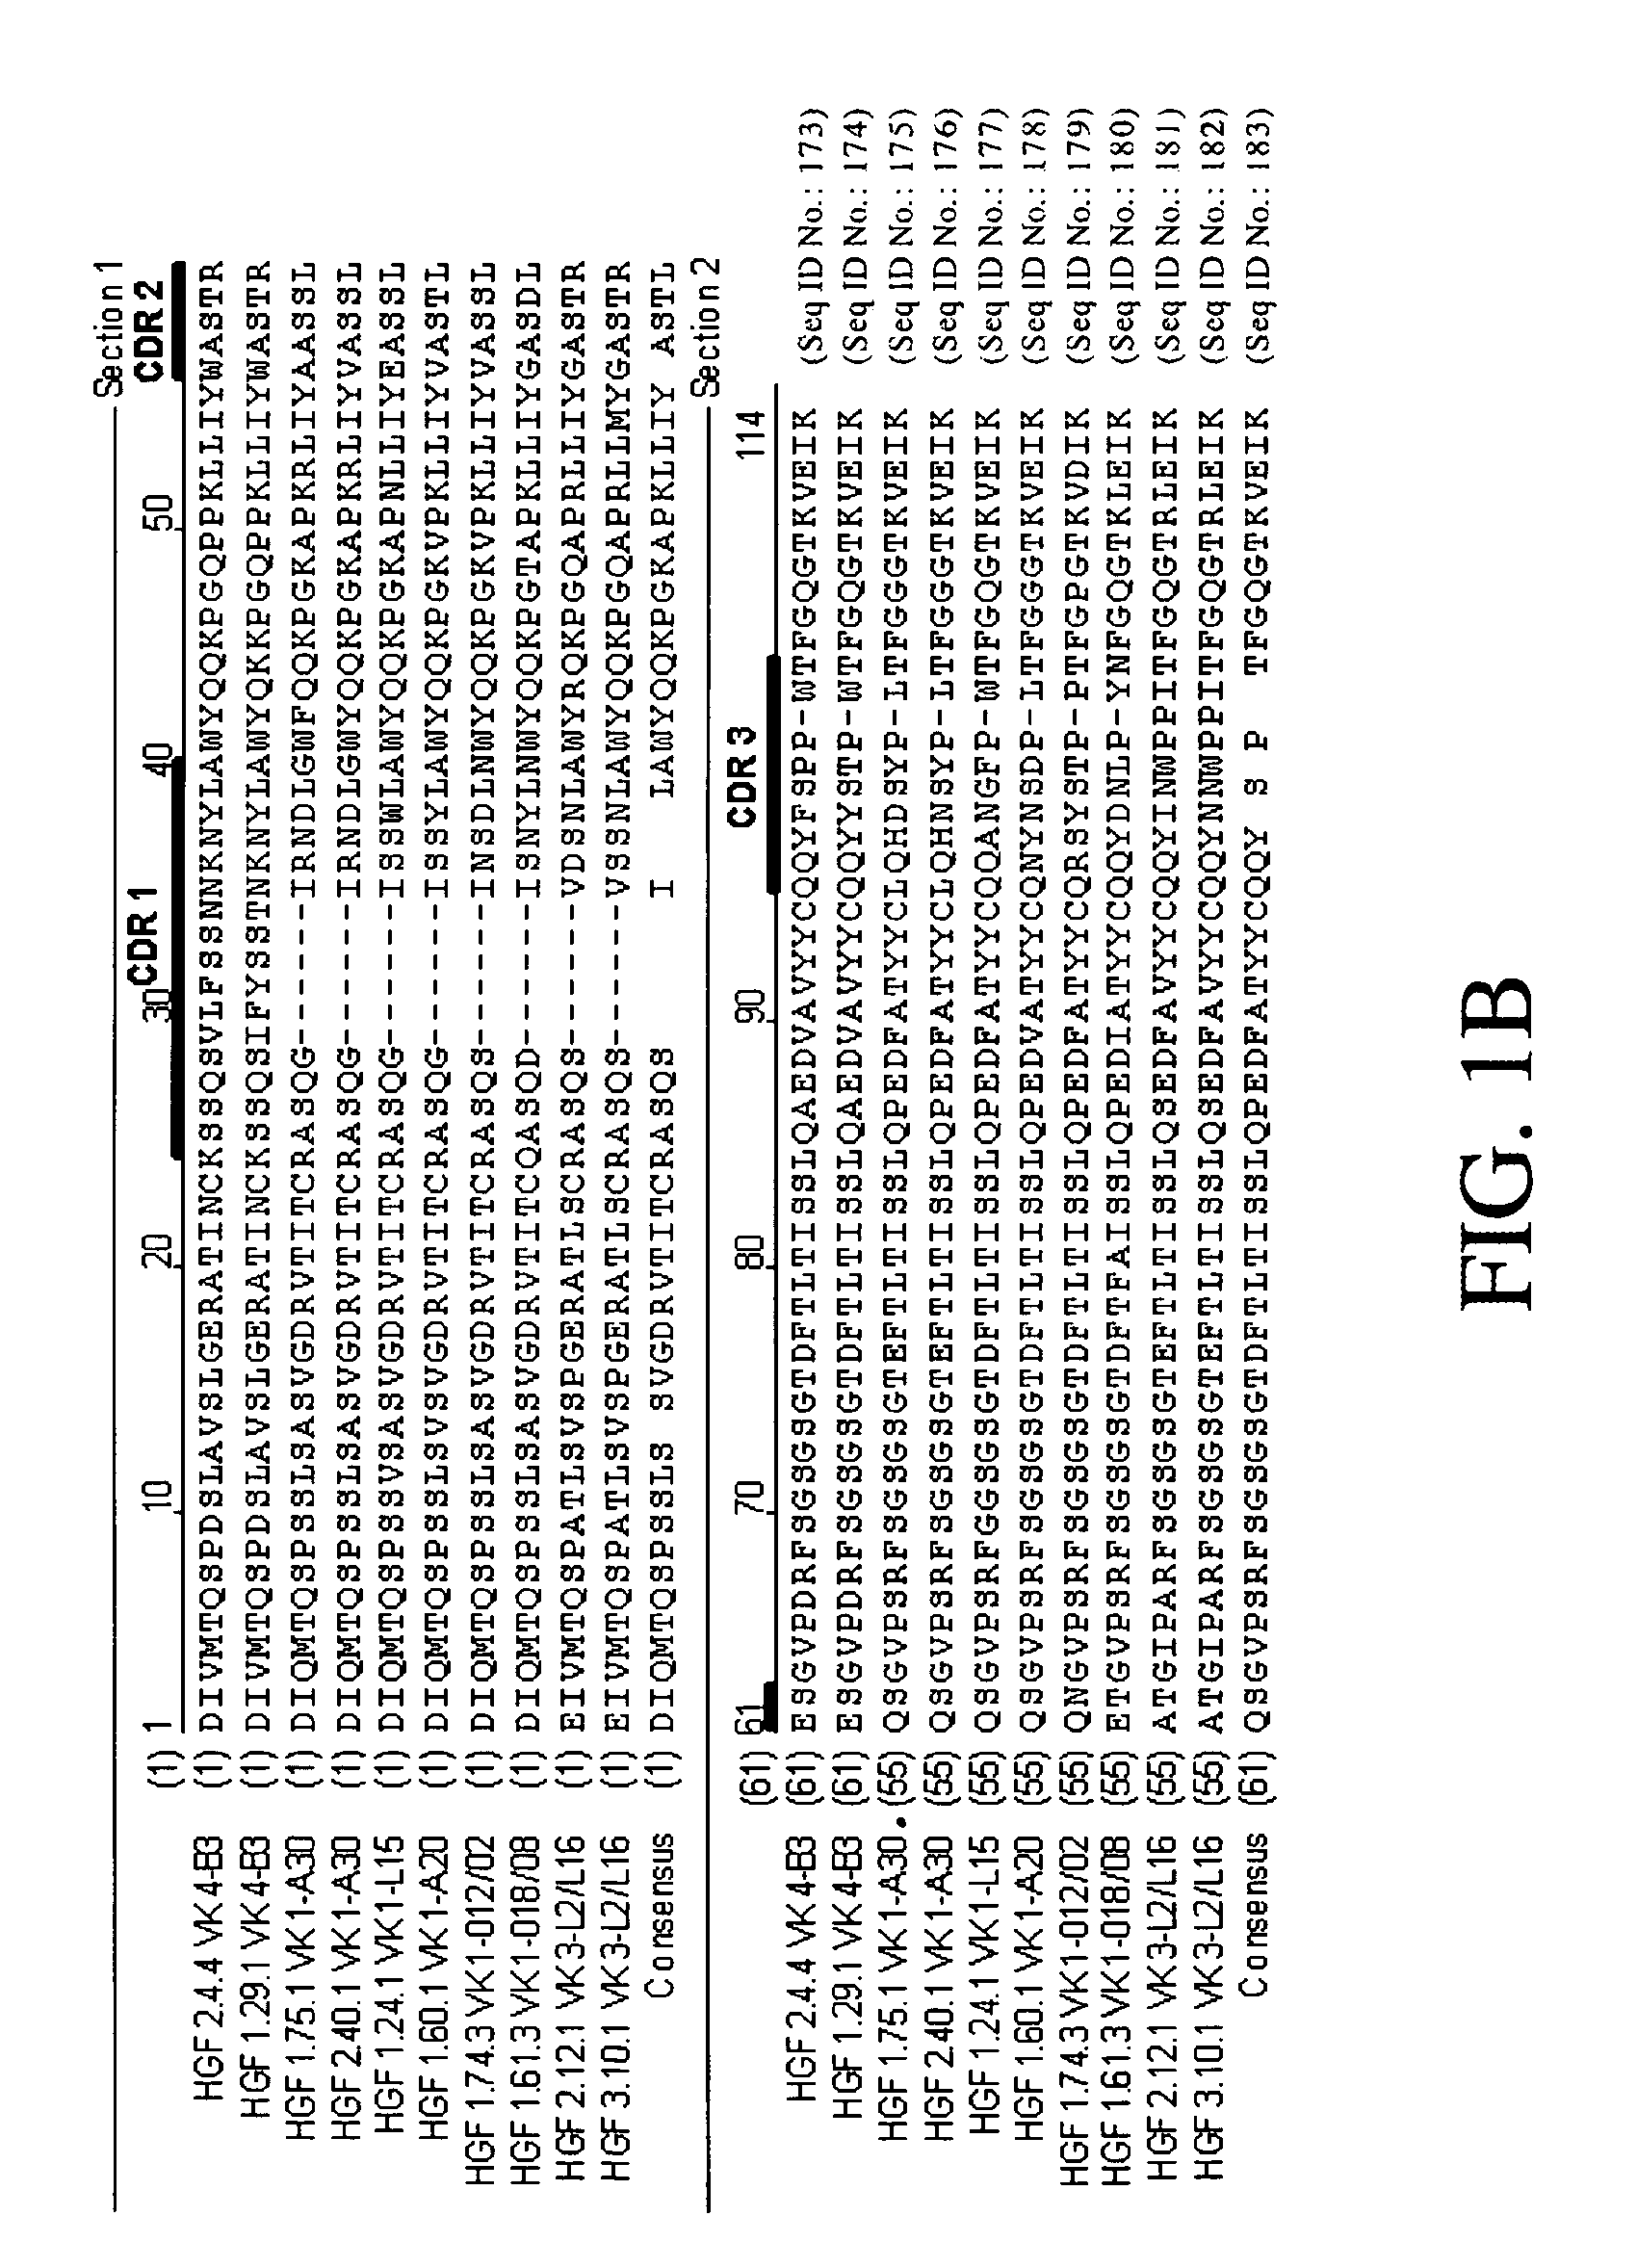 Specific binding agents to hepatocyte growth factor